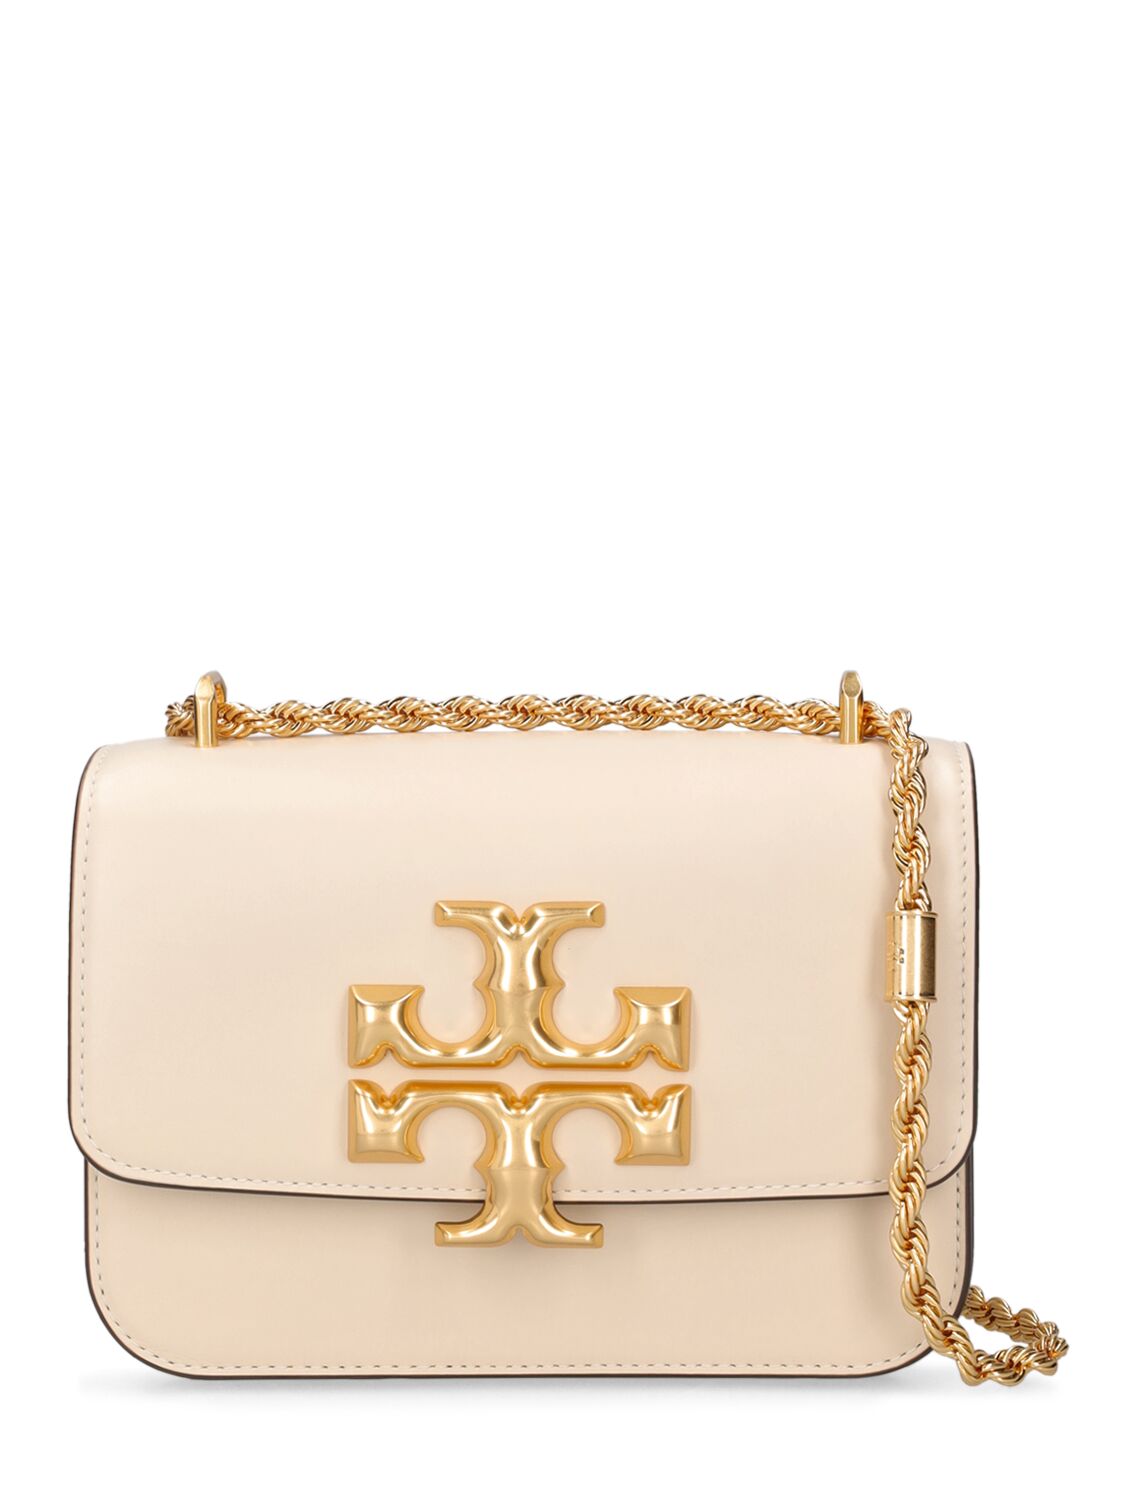 Tory Burch Small Eleanor Leather Shoulder Bag In New Ivory